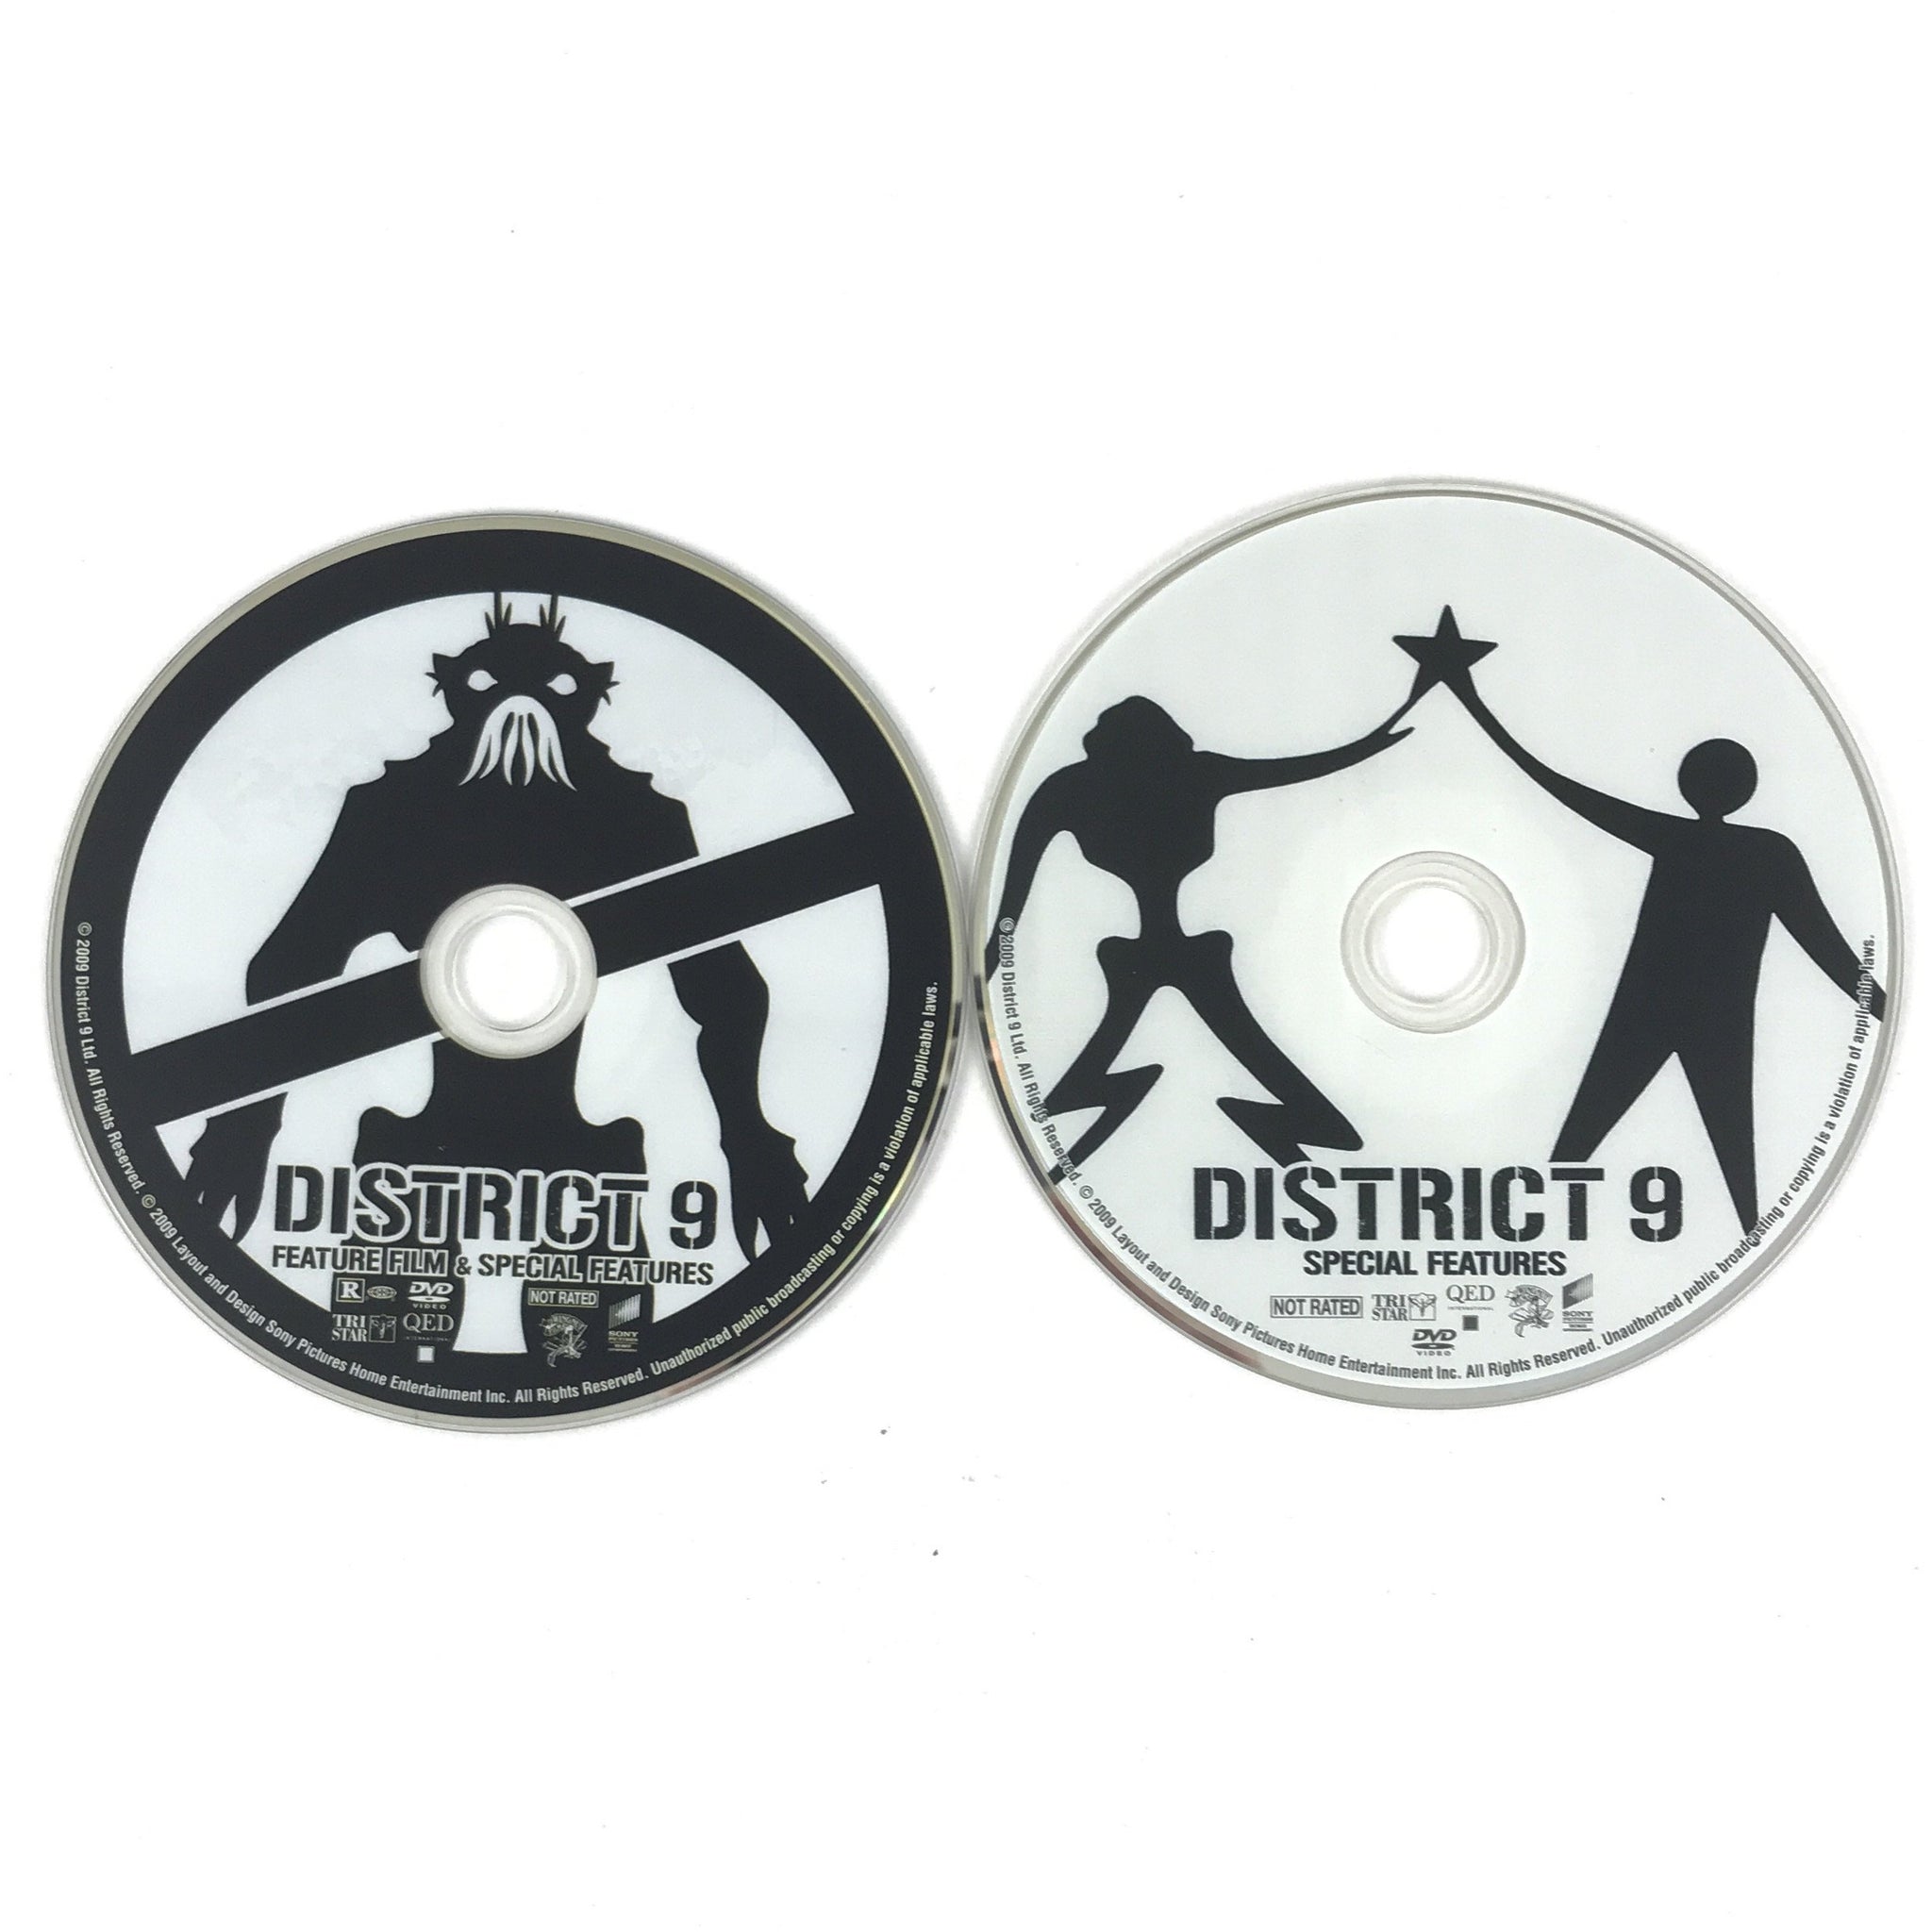 District 9 - DVD 2 DISCS ONLY